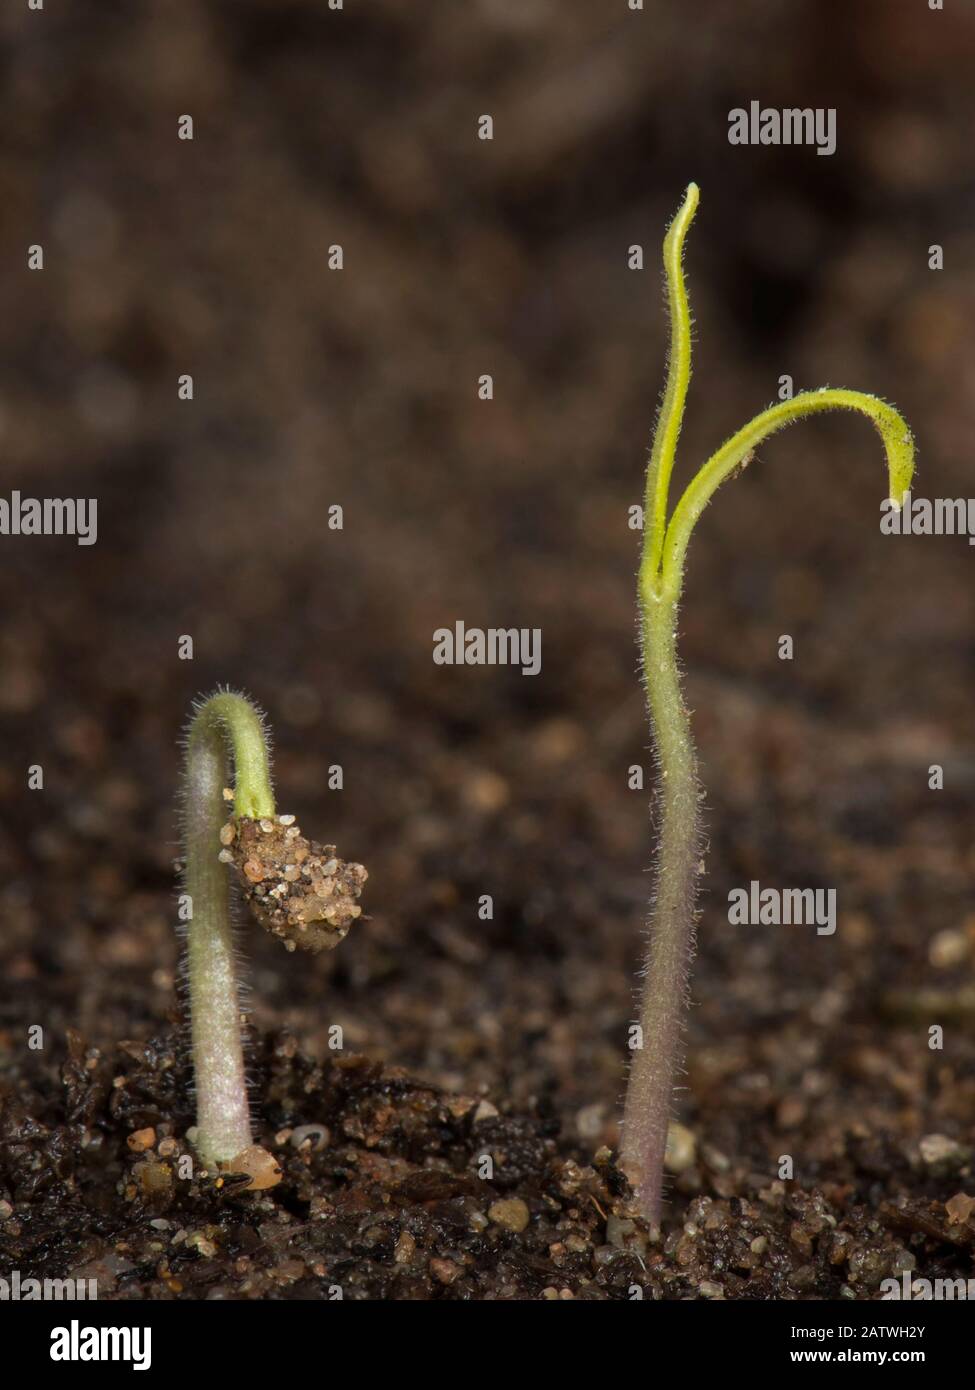 Gardeners delight, Cherry tomato seedling just germinated with cotyledons above the soil Stock Photo